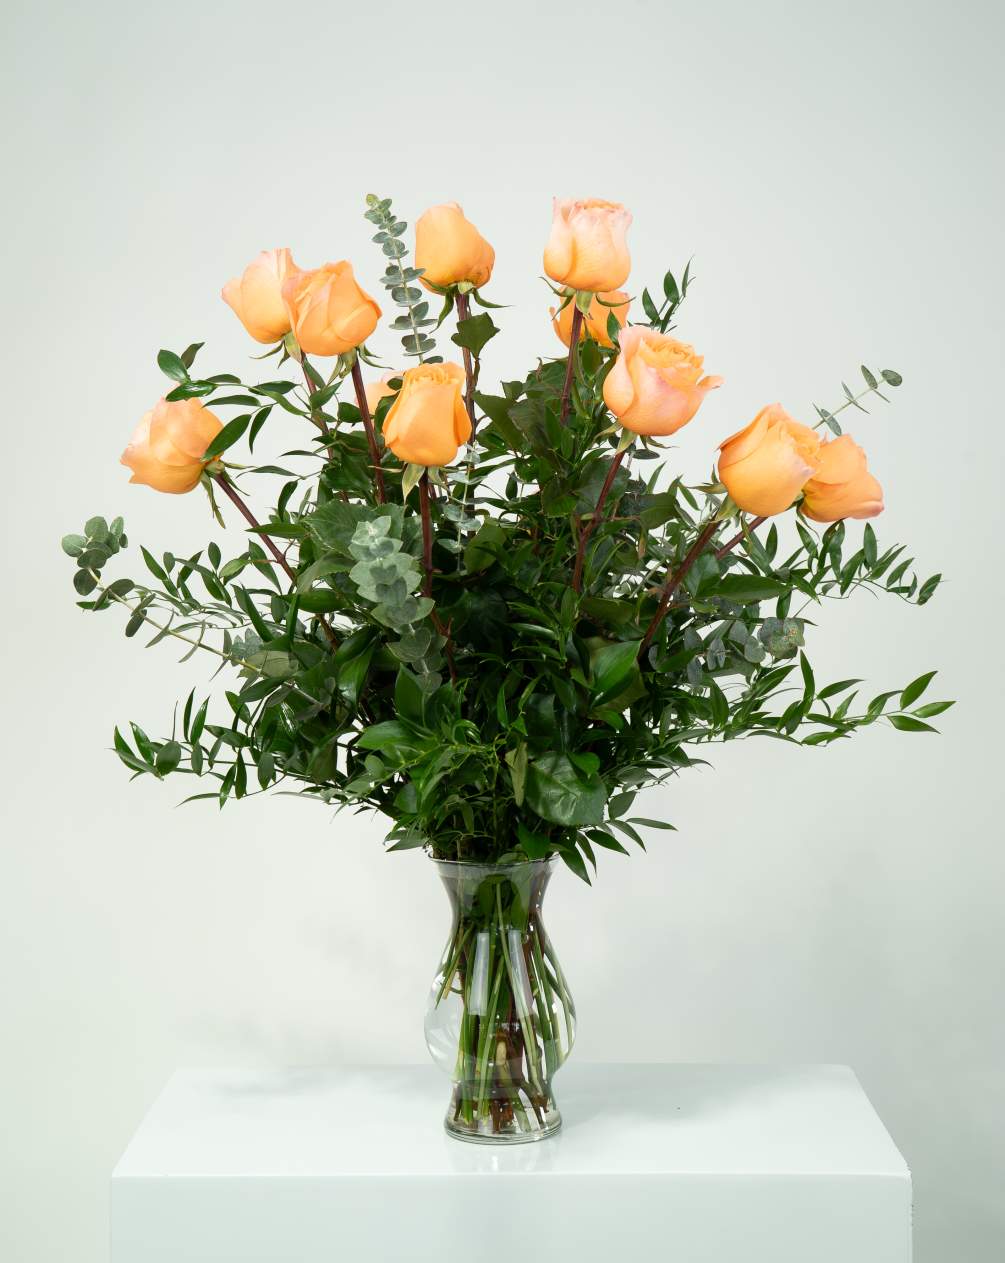 Like a peach these roses are juicy and fresh. Decorated with Italian